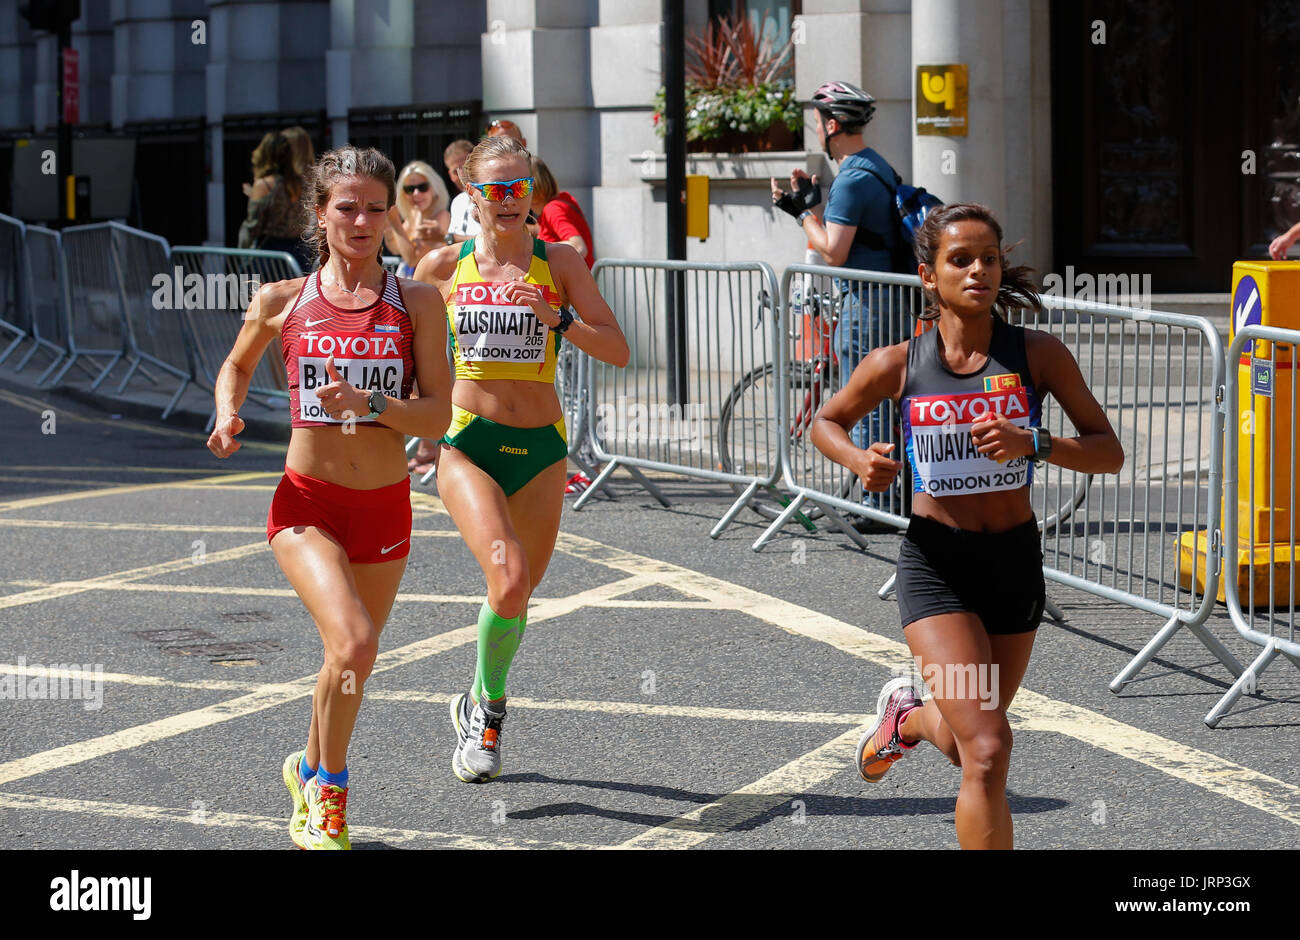 August 6th 2017 World Athletics Championship in London. IAAF women marathon 06/08/2017 started at 2pm local time. UK weather is perfect for a marathon with sun and few white clouds. Women running marathon are cometeing for a world champion title 2017. IAAF 2017 women marathon world champion and gold medal. Winner will be announced very soon. Stock Photo